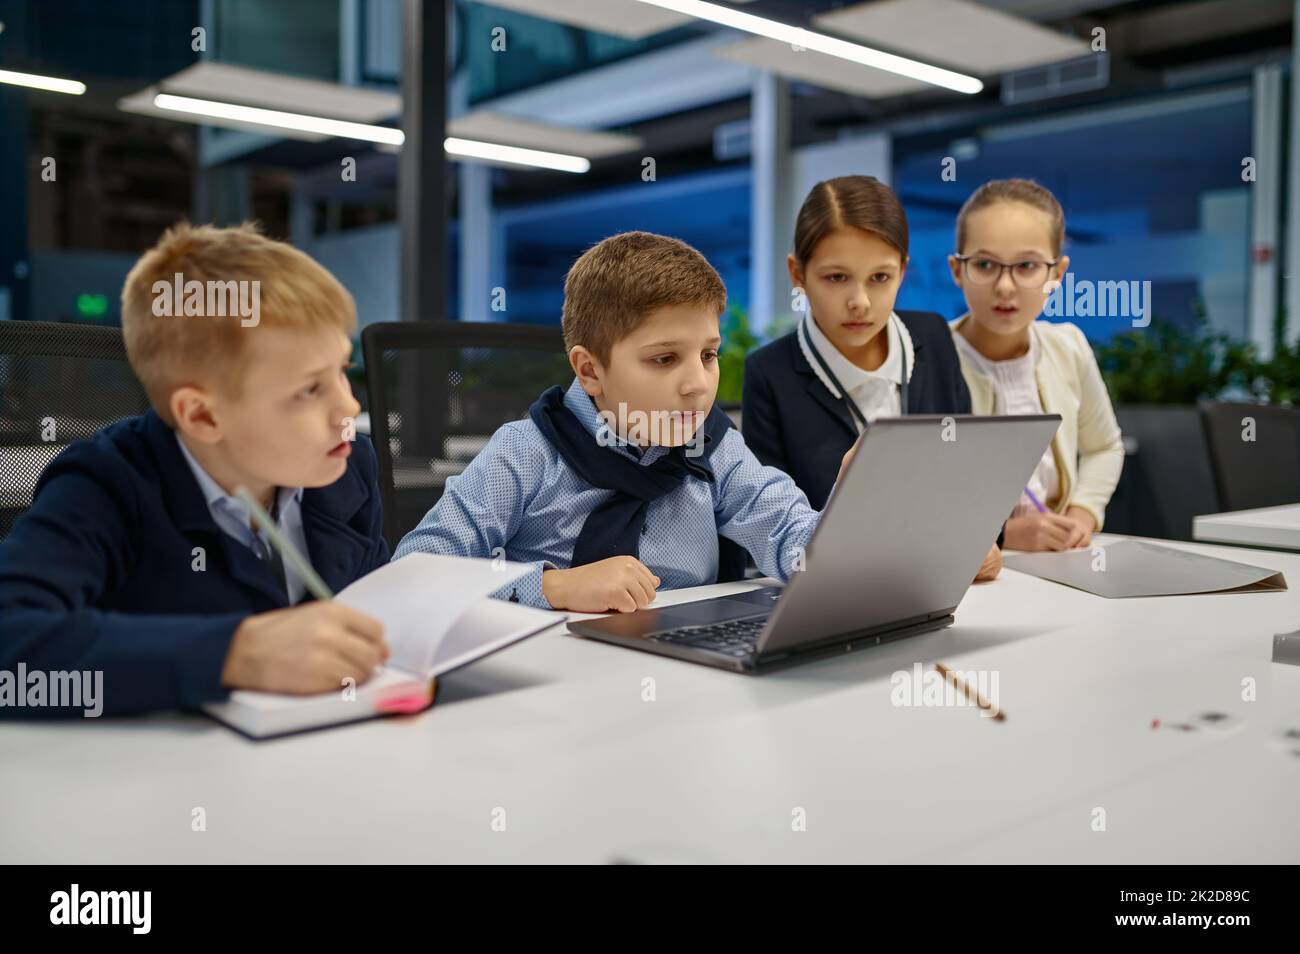 Children looking at laptop screen discussing something Stock Photo